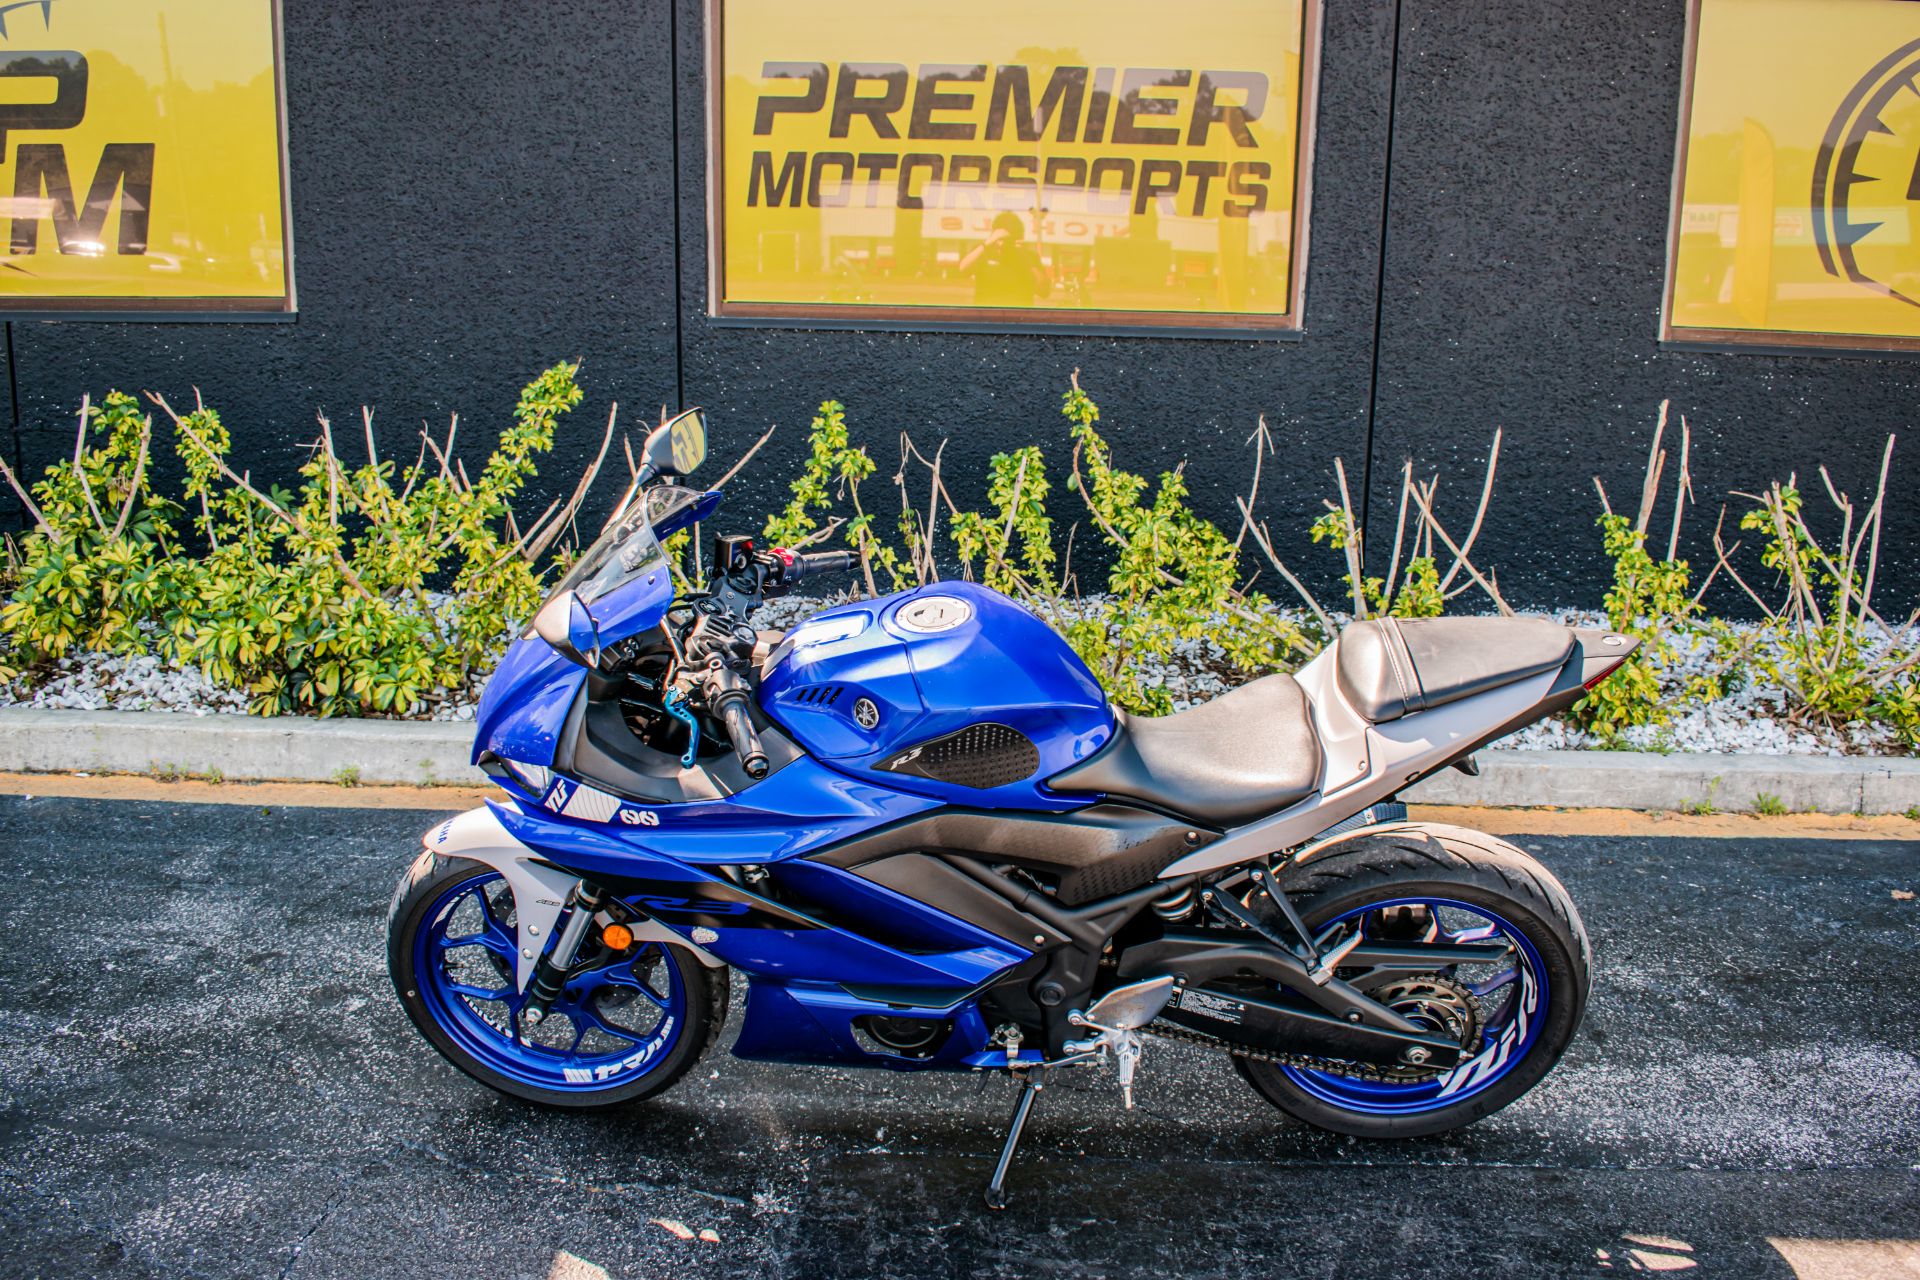 2021 Yamaha YZF-R3 ABS in Jacksonville, Florida - Photo 13